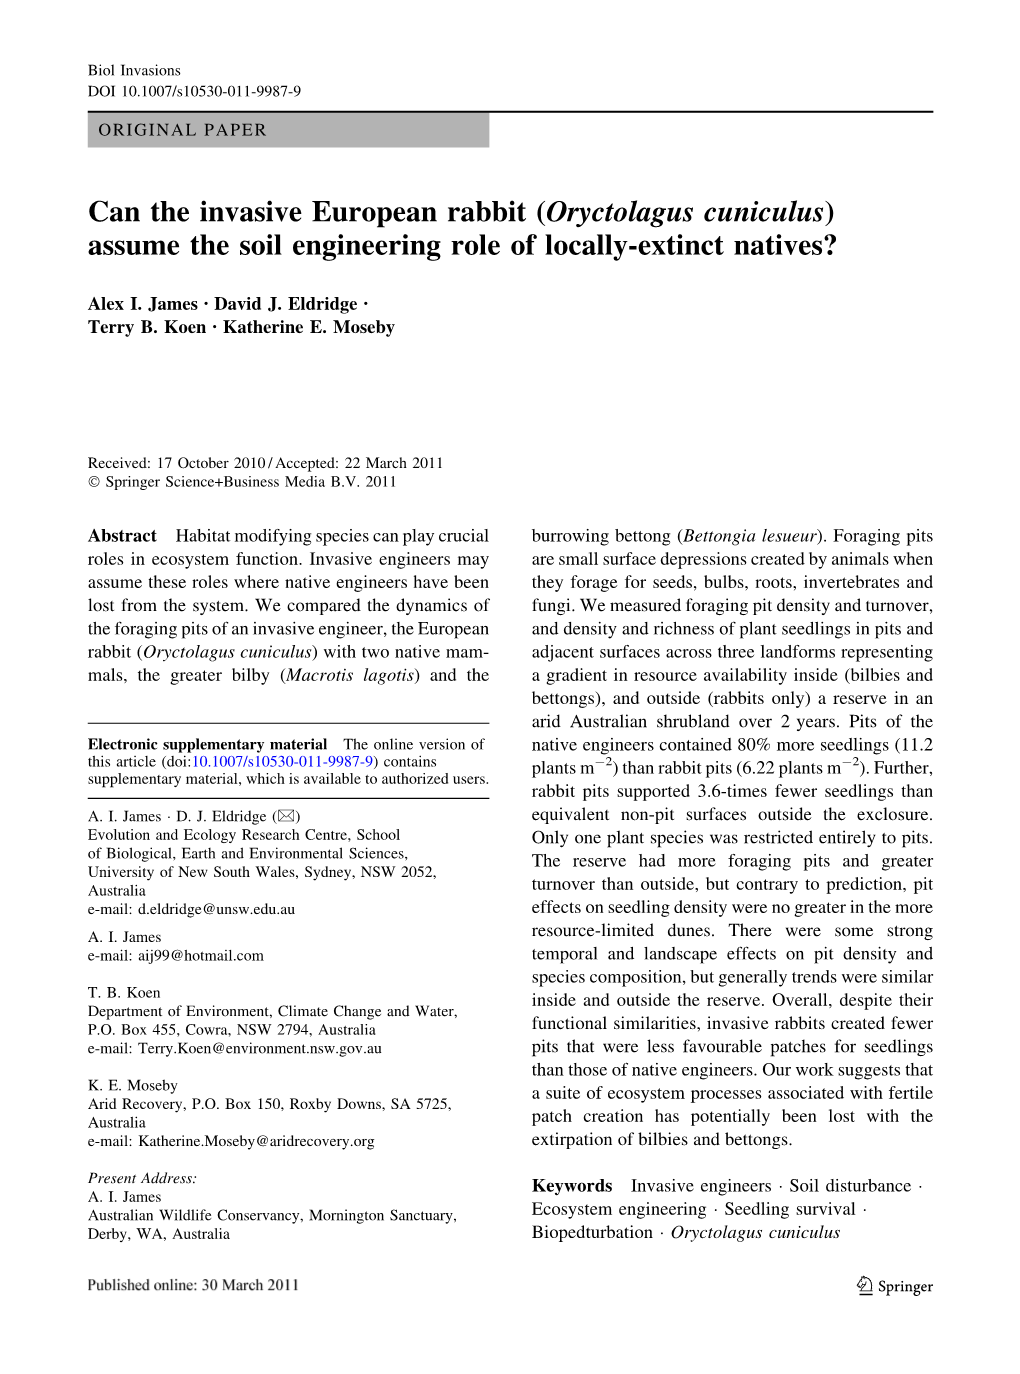 Can the Invasive European Rabbit (Oryctolagus Cuniculus) Assume the Soil Engineering Role of Locally-Extinct Natives?